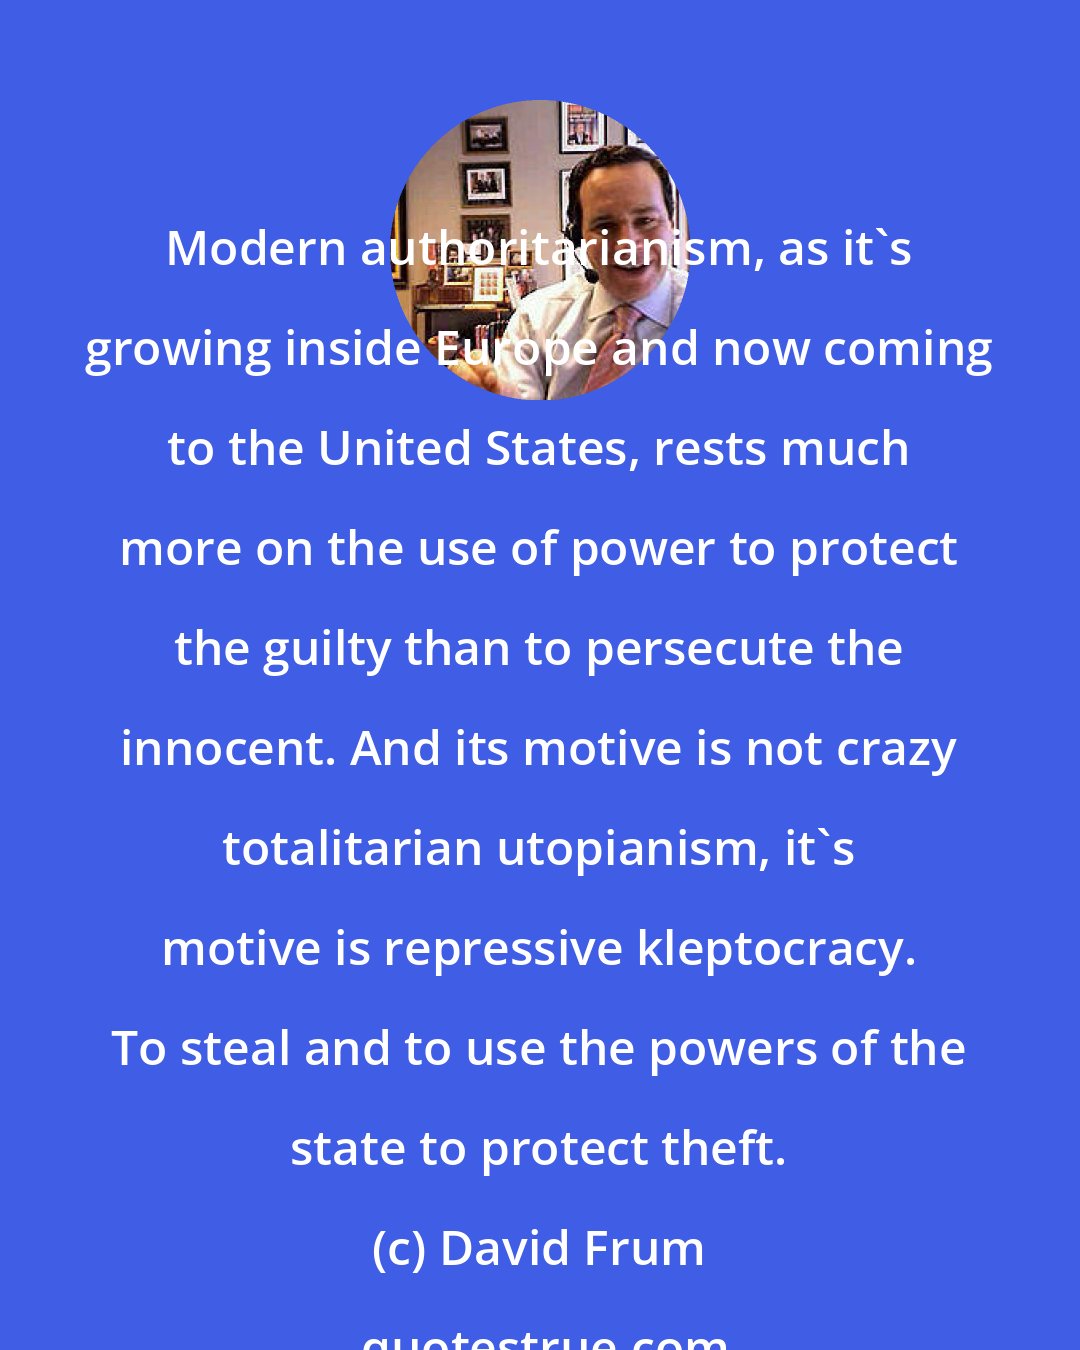 David Frum: Modern authoritarianism, as it's growing inside Europe and now coming to the United States, rests much more on the use of power to protect the guilty than to persecute the innocent. And its motive is not crazy totalitarian utopianism, it's motive is repressive kleptocracy. To steal and to use the powers of the state to protect theft.